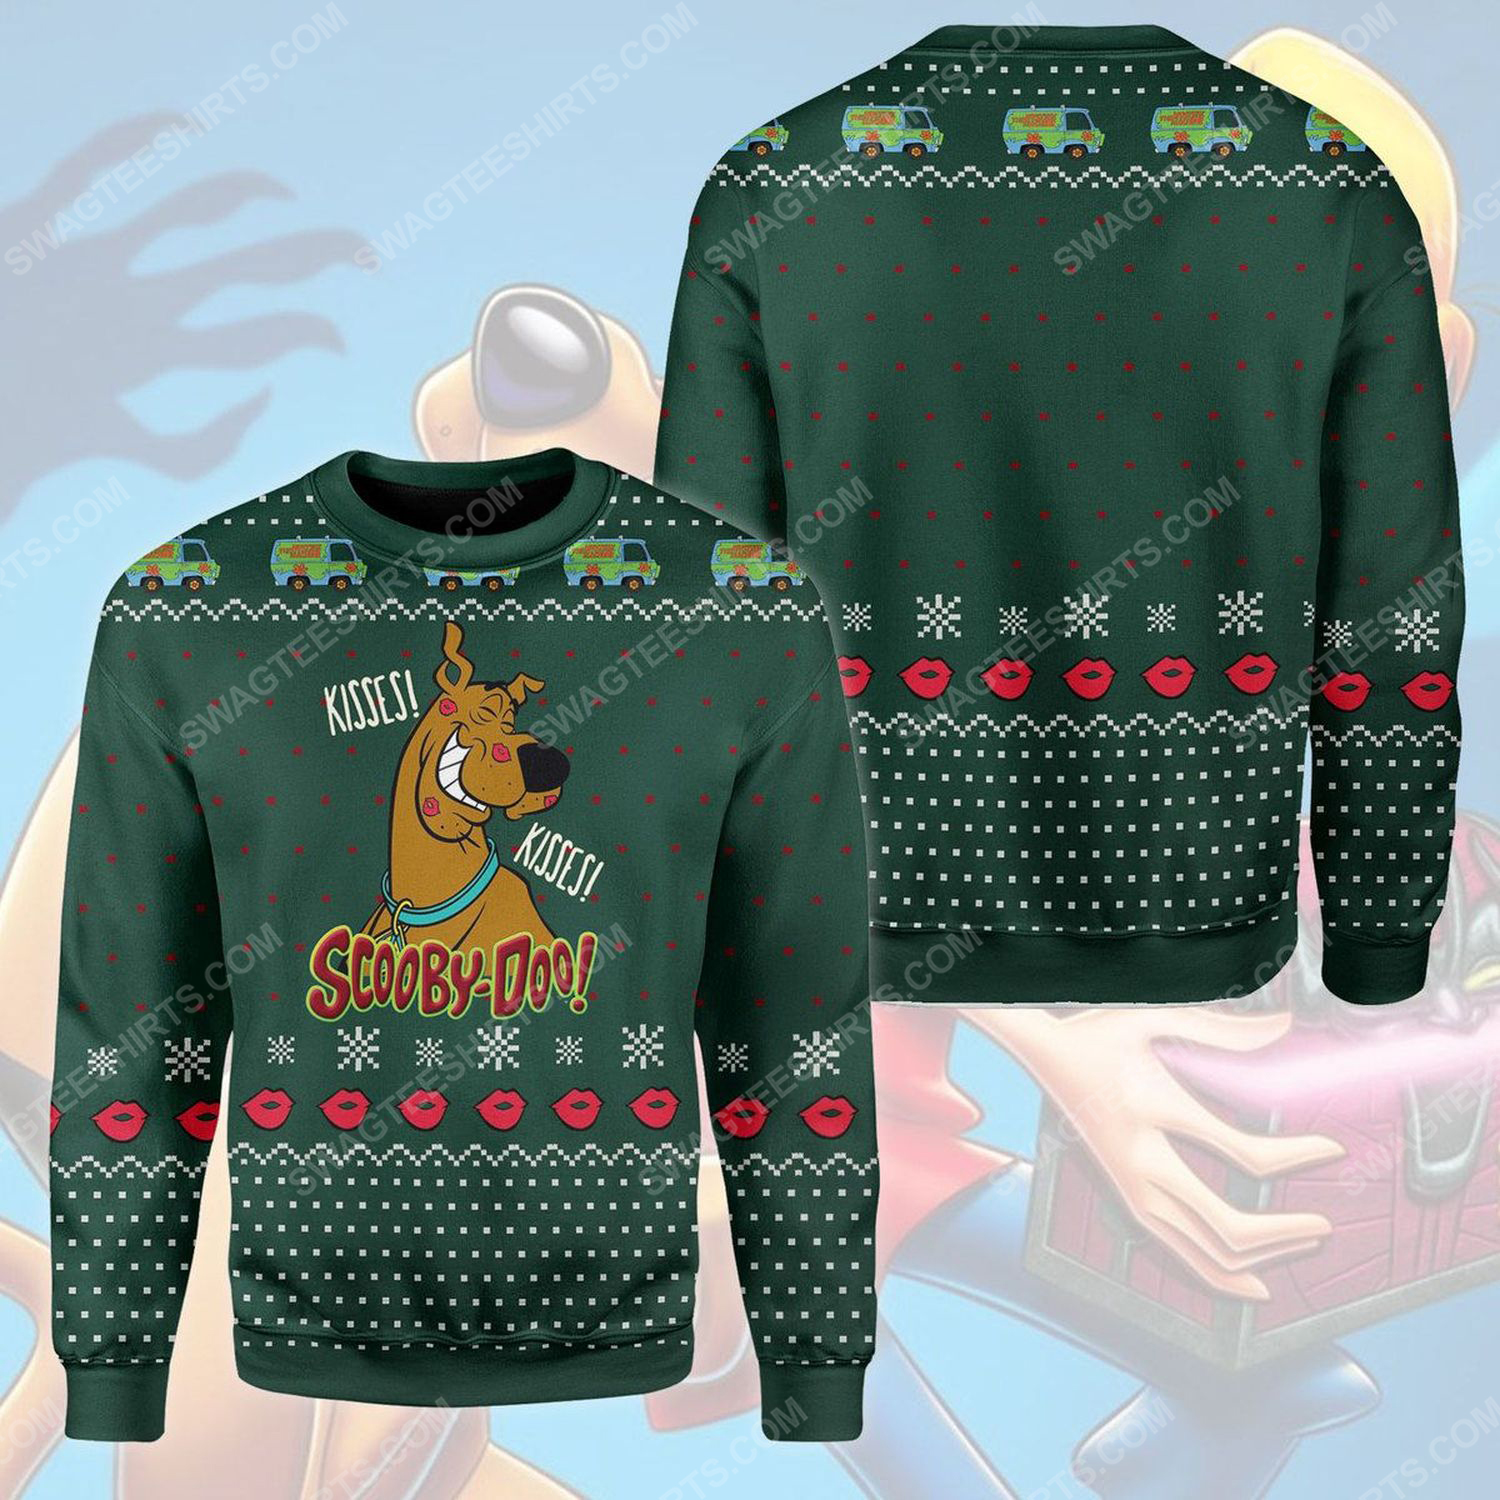 Kissed scooby doo ugly christmas sweater